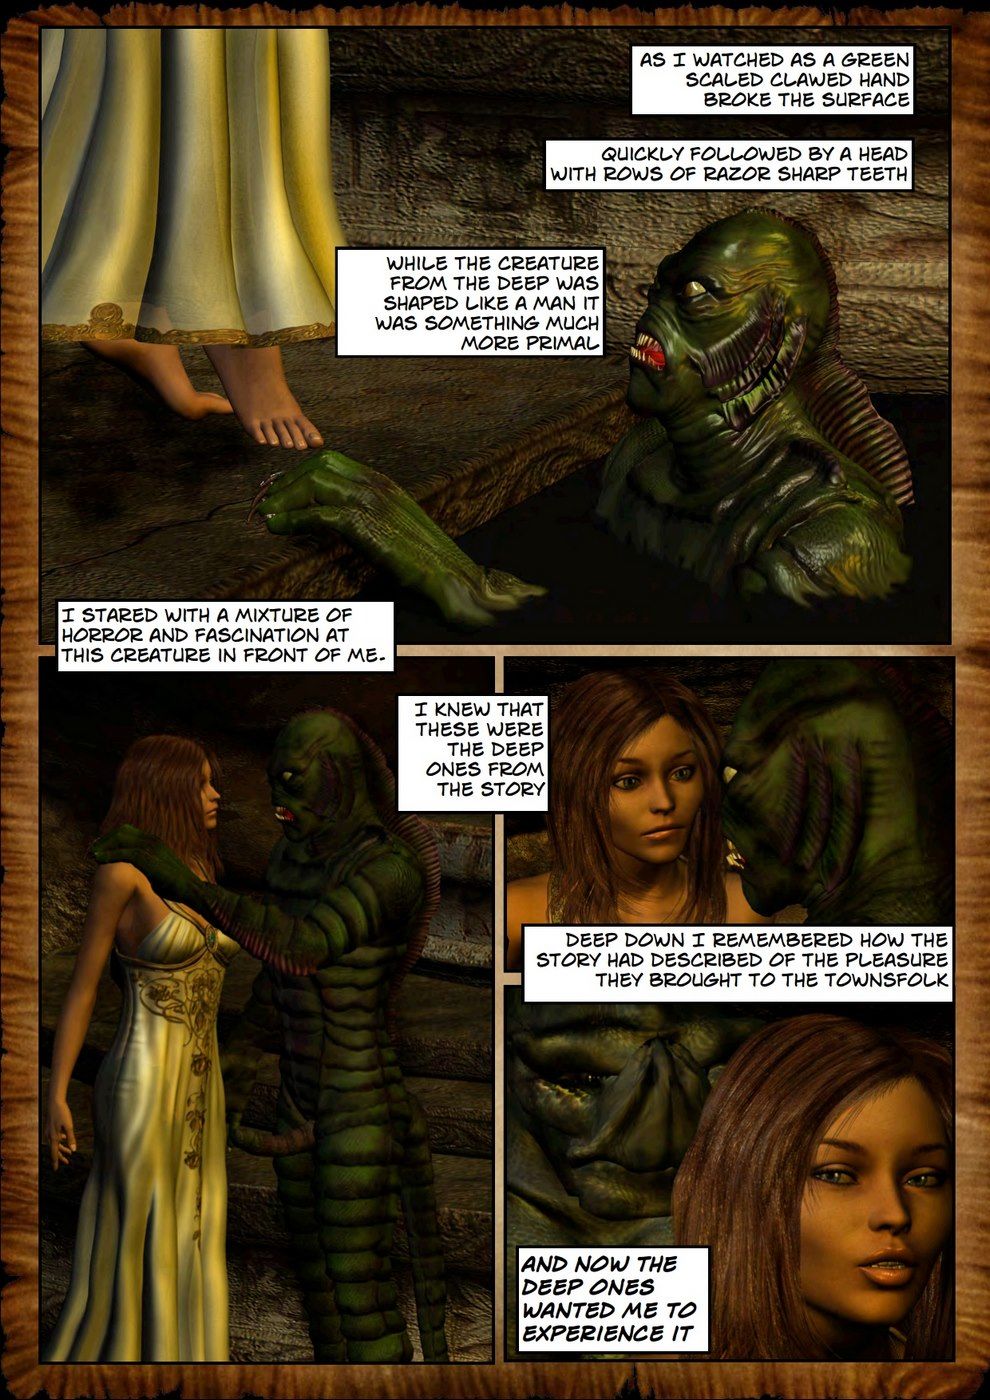 Shadows of Innsmouth Part 2 - Taboo Studios page 4